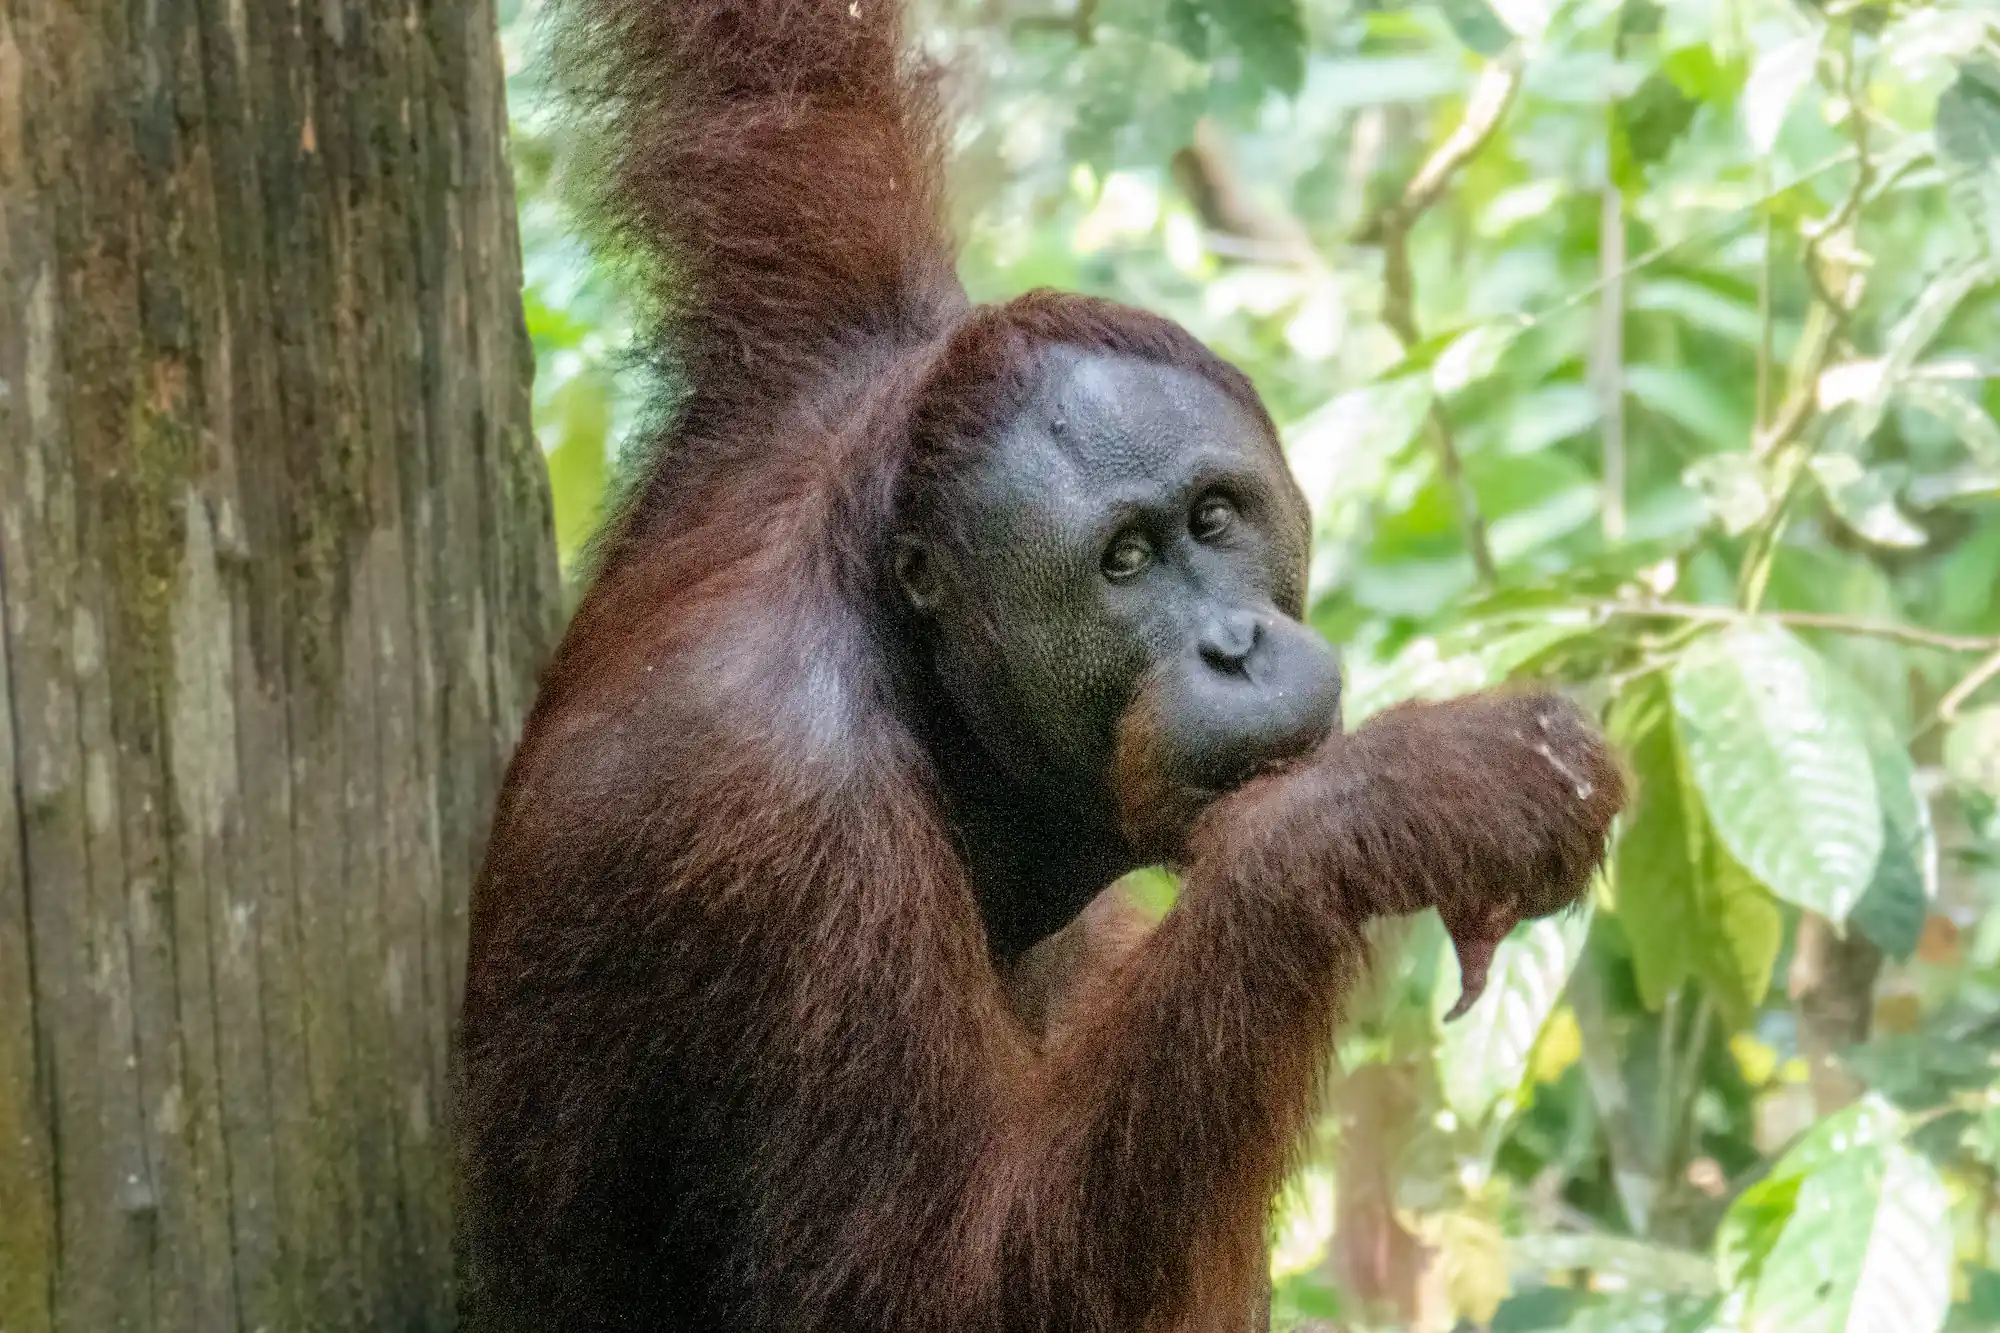 Orangutan eating something out of its hand and hanging in tree